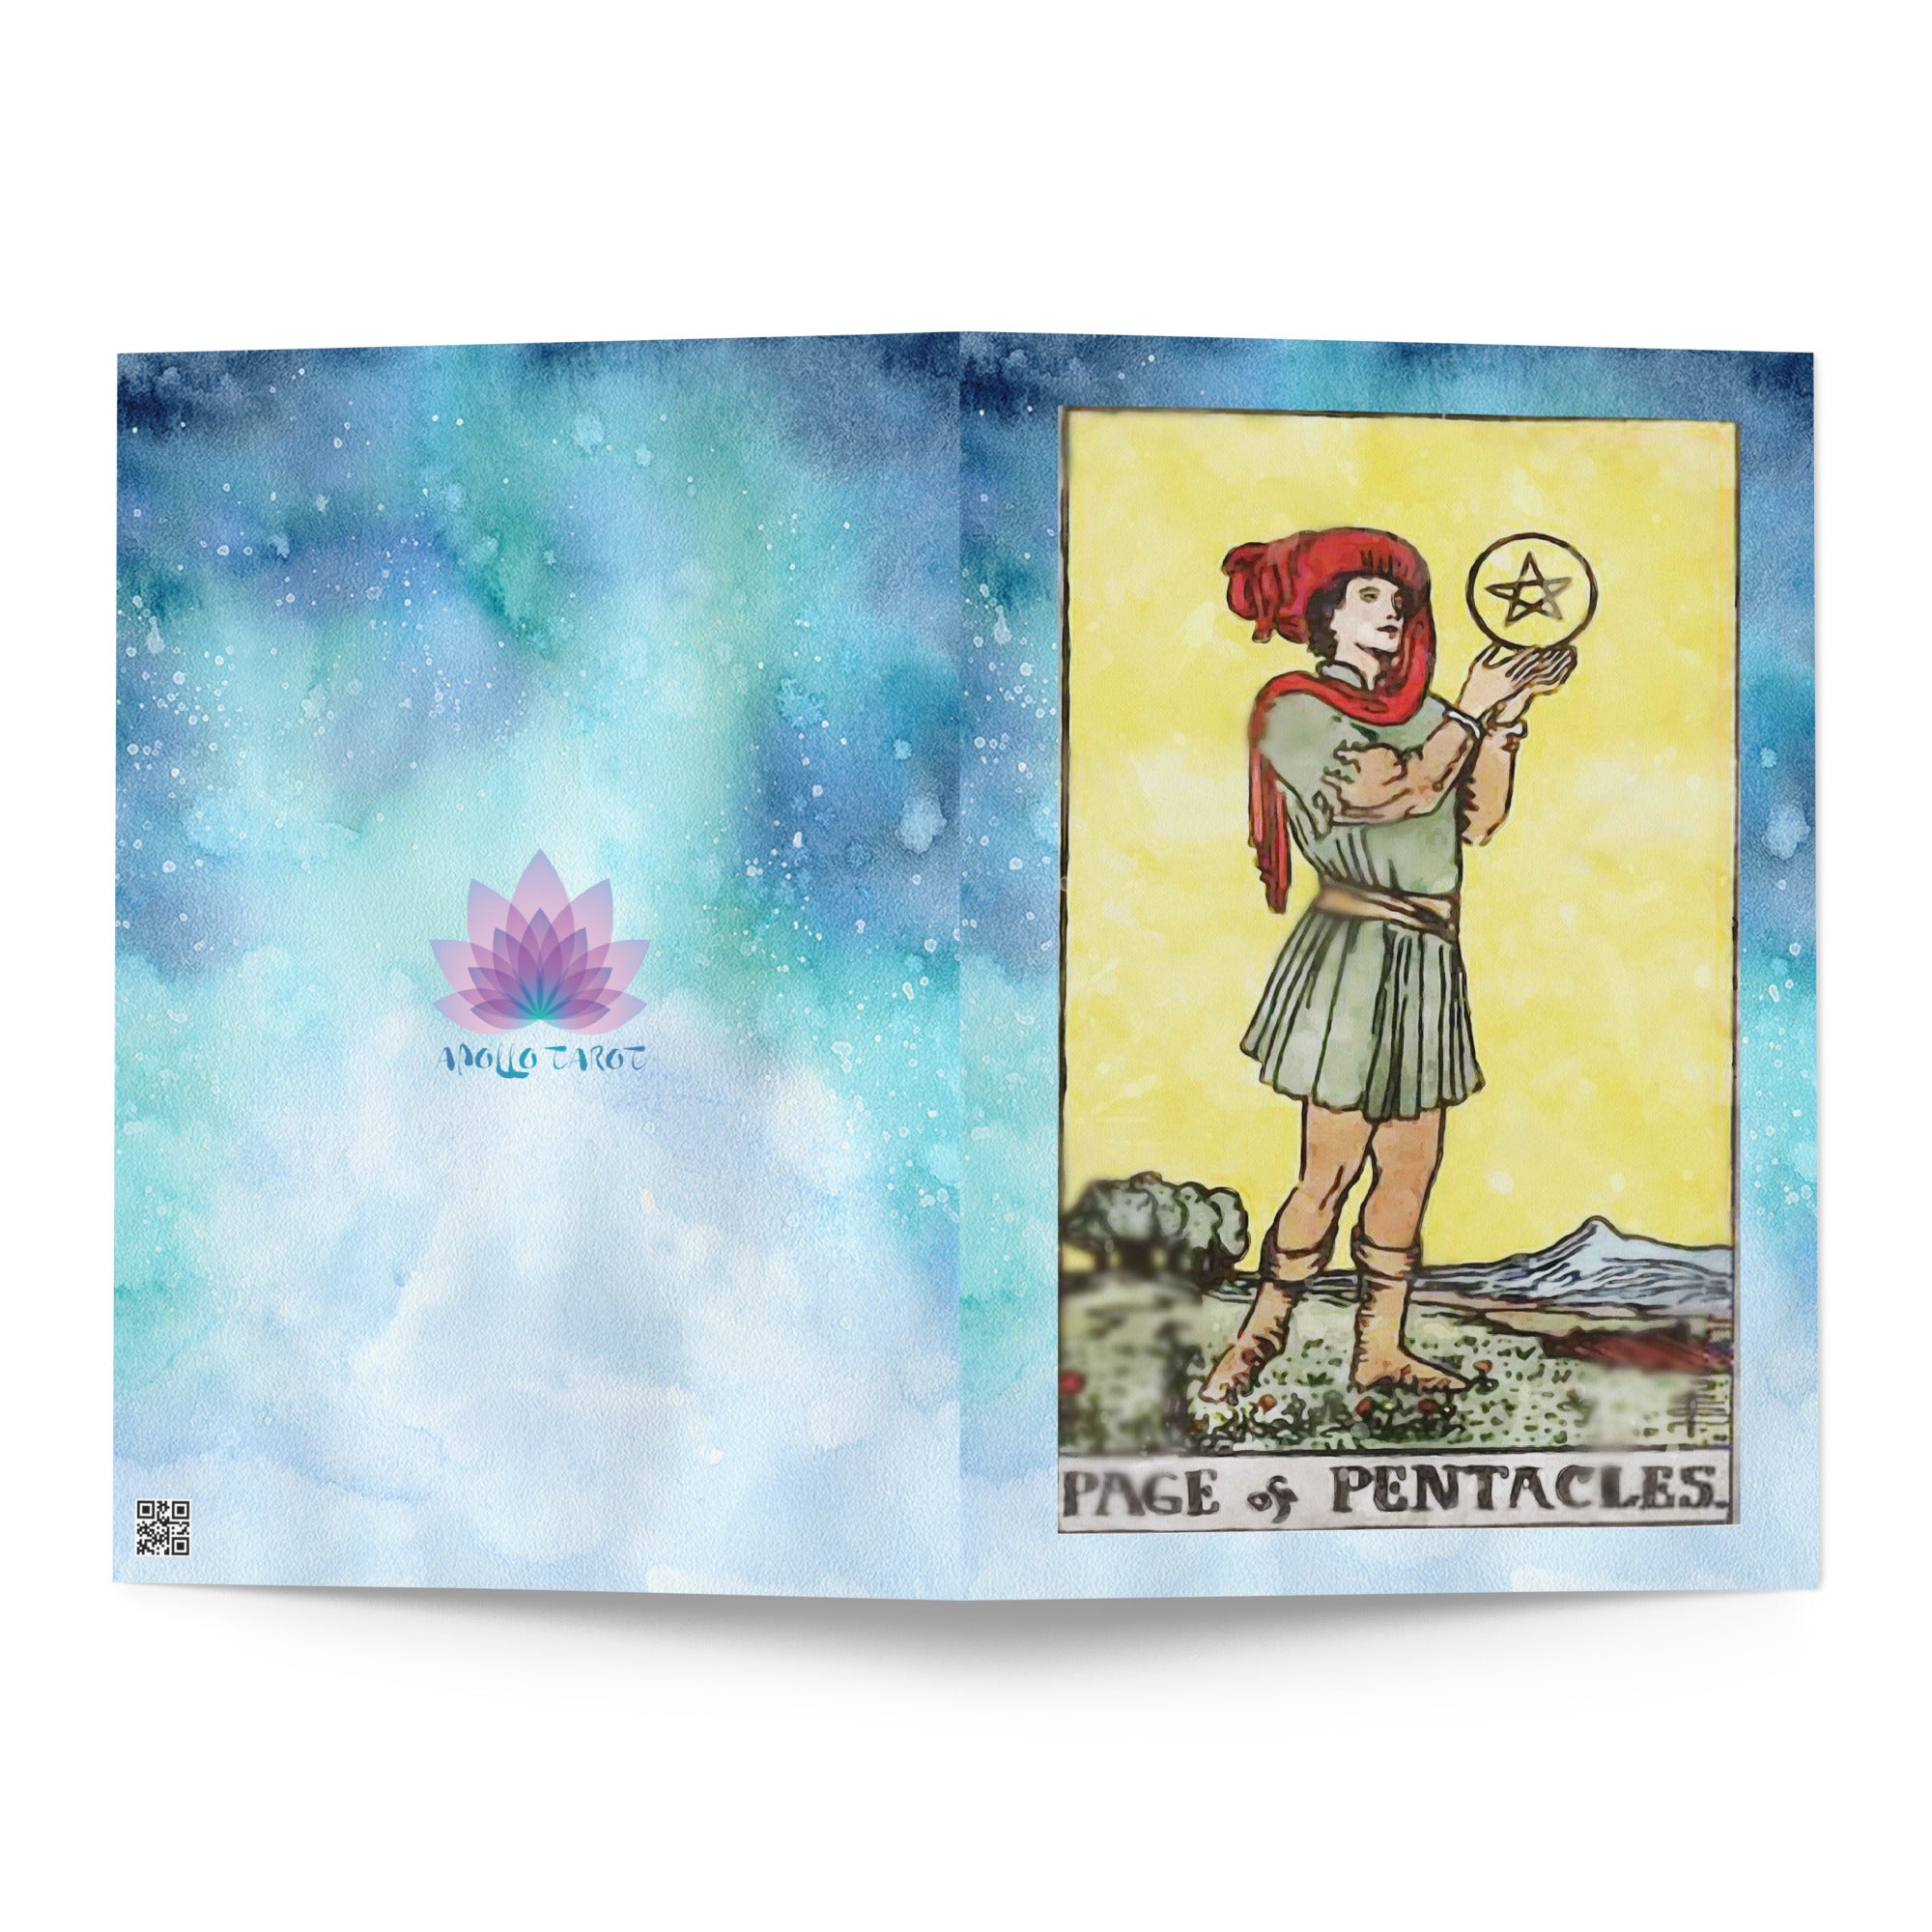 Greeting Card Of The Page Of Pentacles Tarot Card For Freshman Or Graduating Students | Apollo Tarot Shop